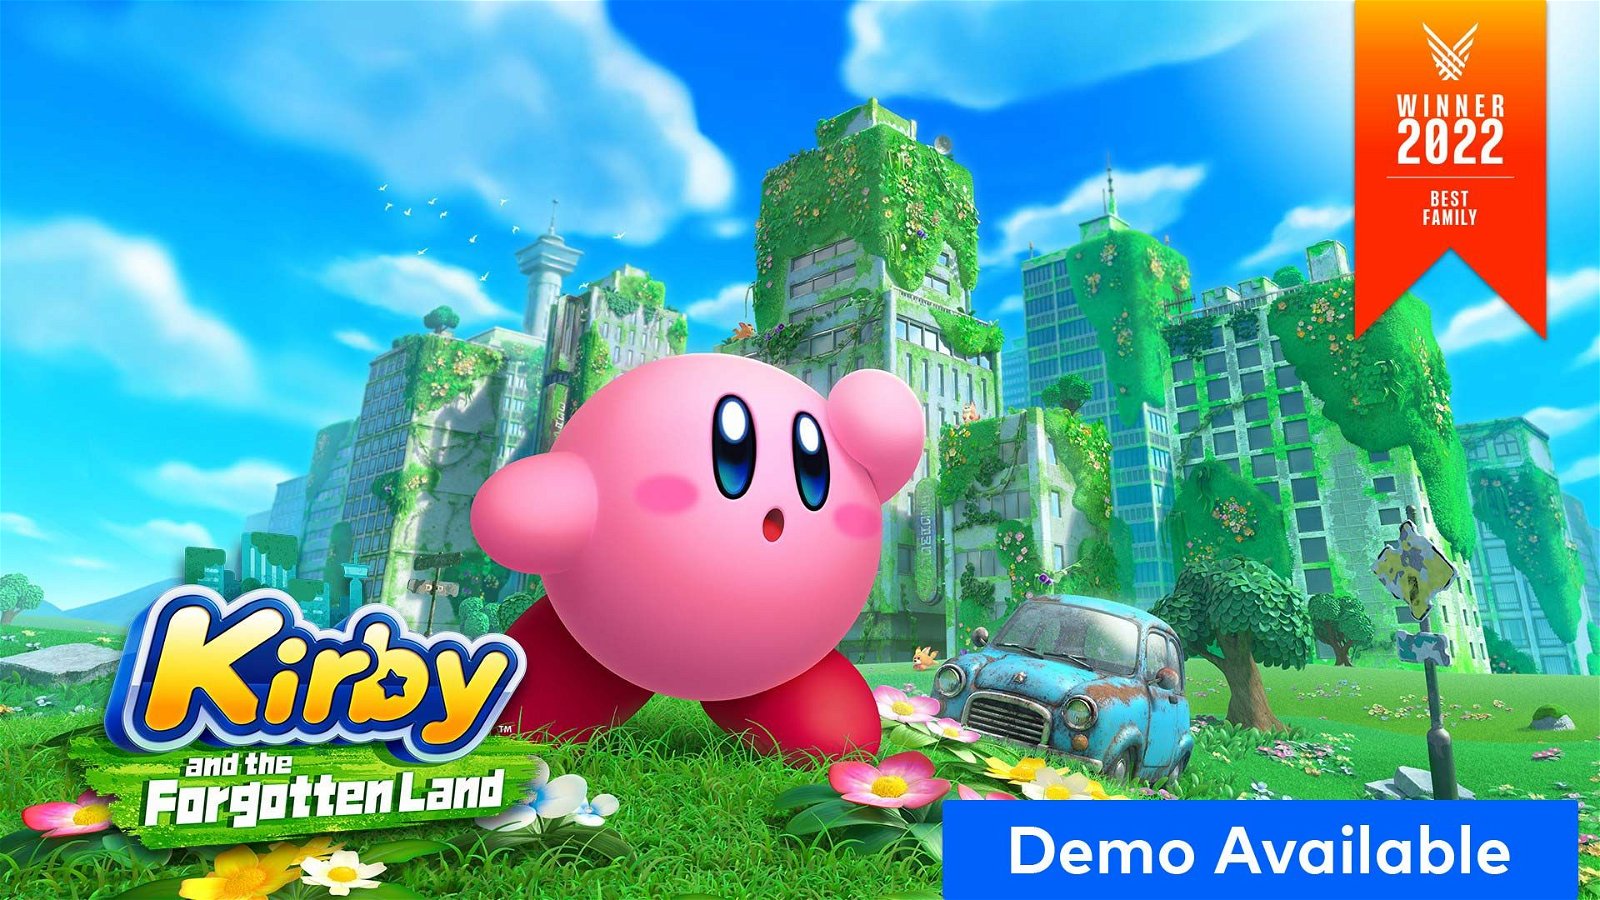 Image of Kirby and the Forgotten Land